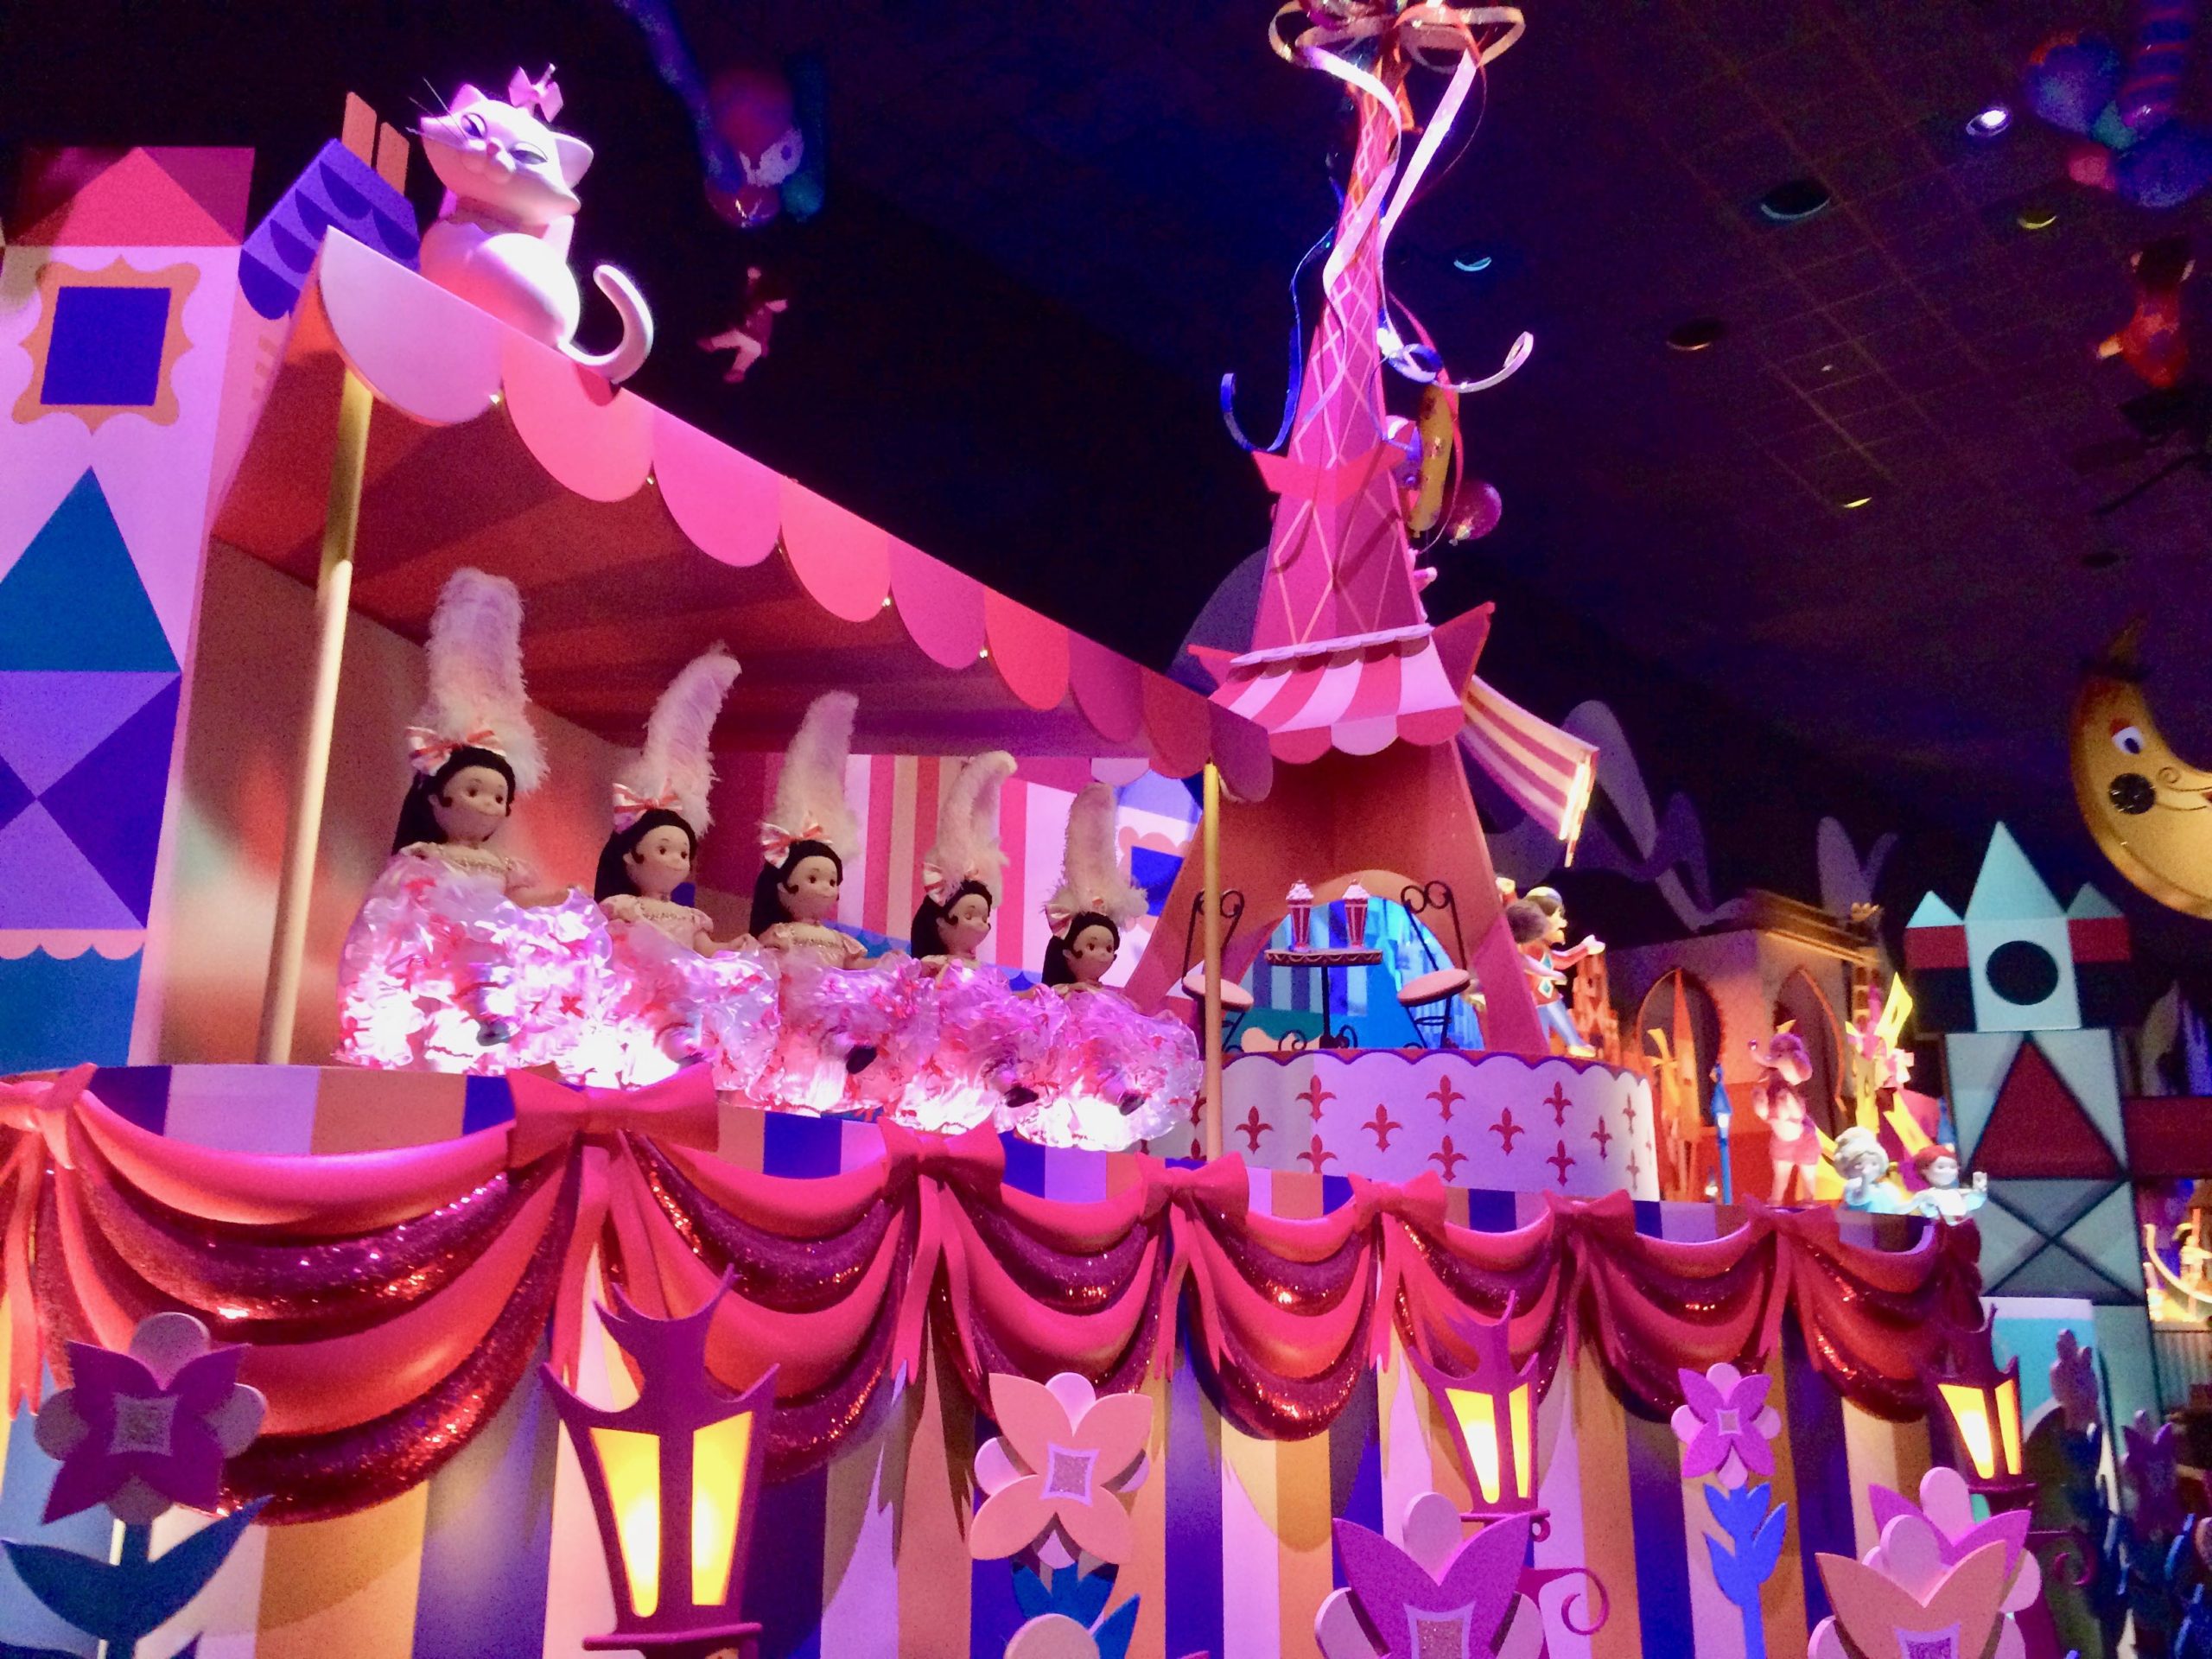 Life Lessons From "it's a small world"